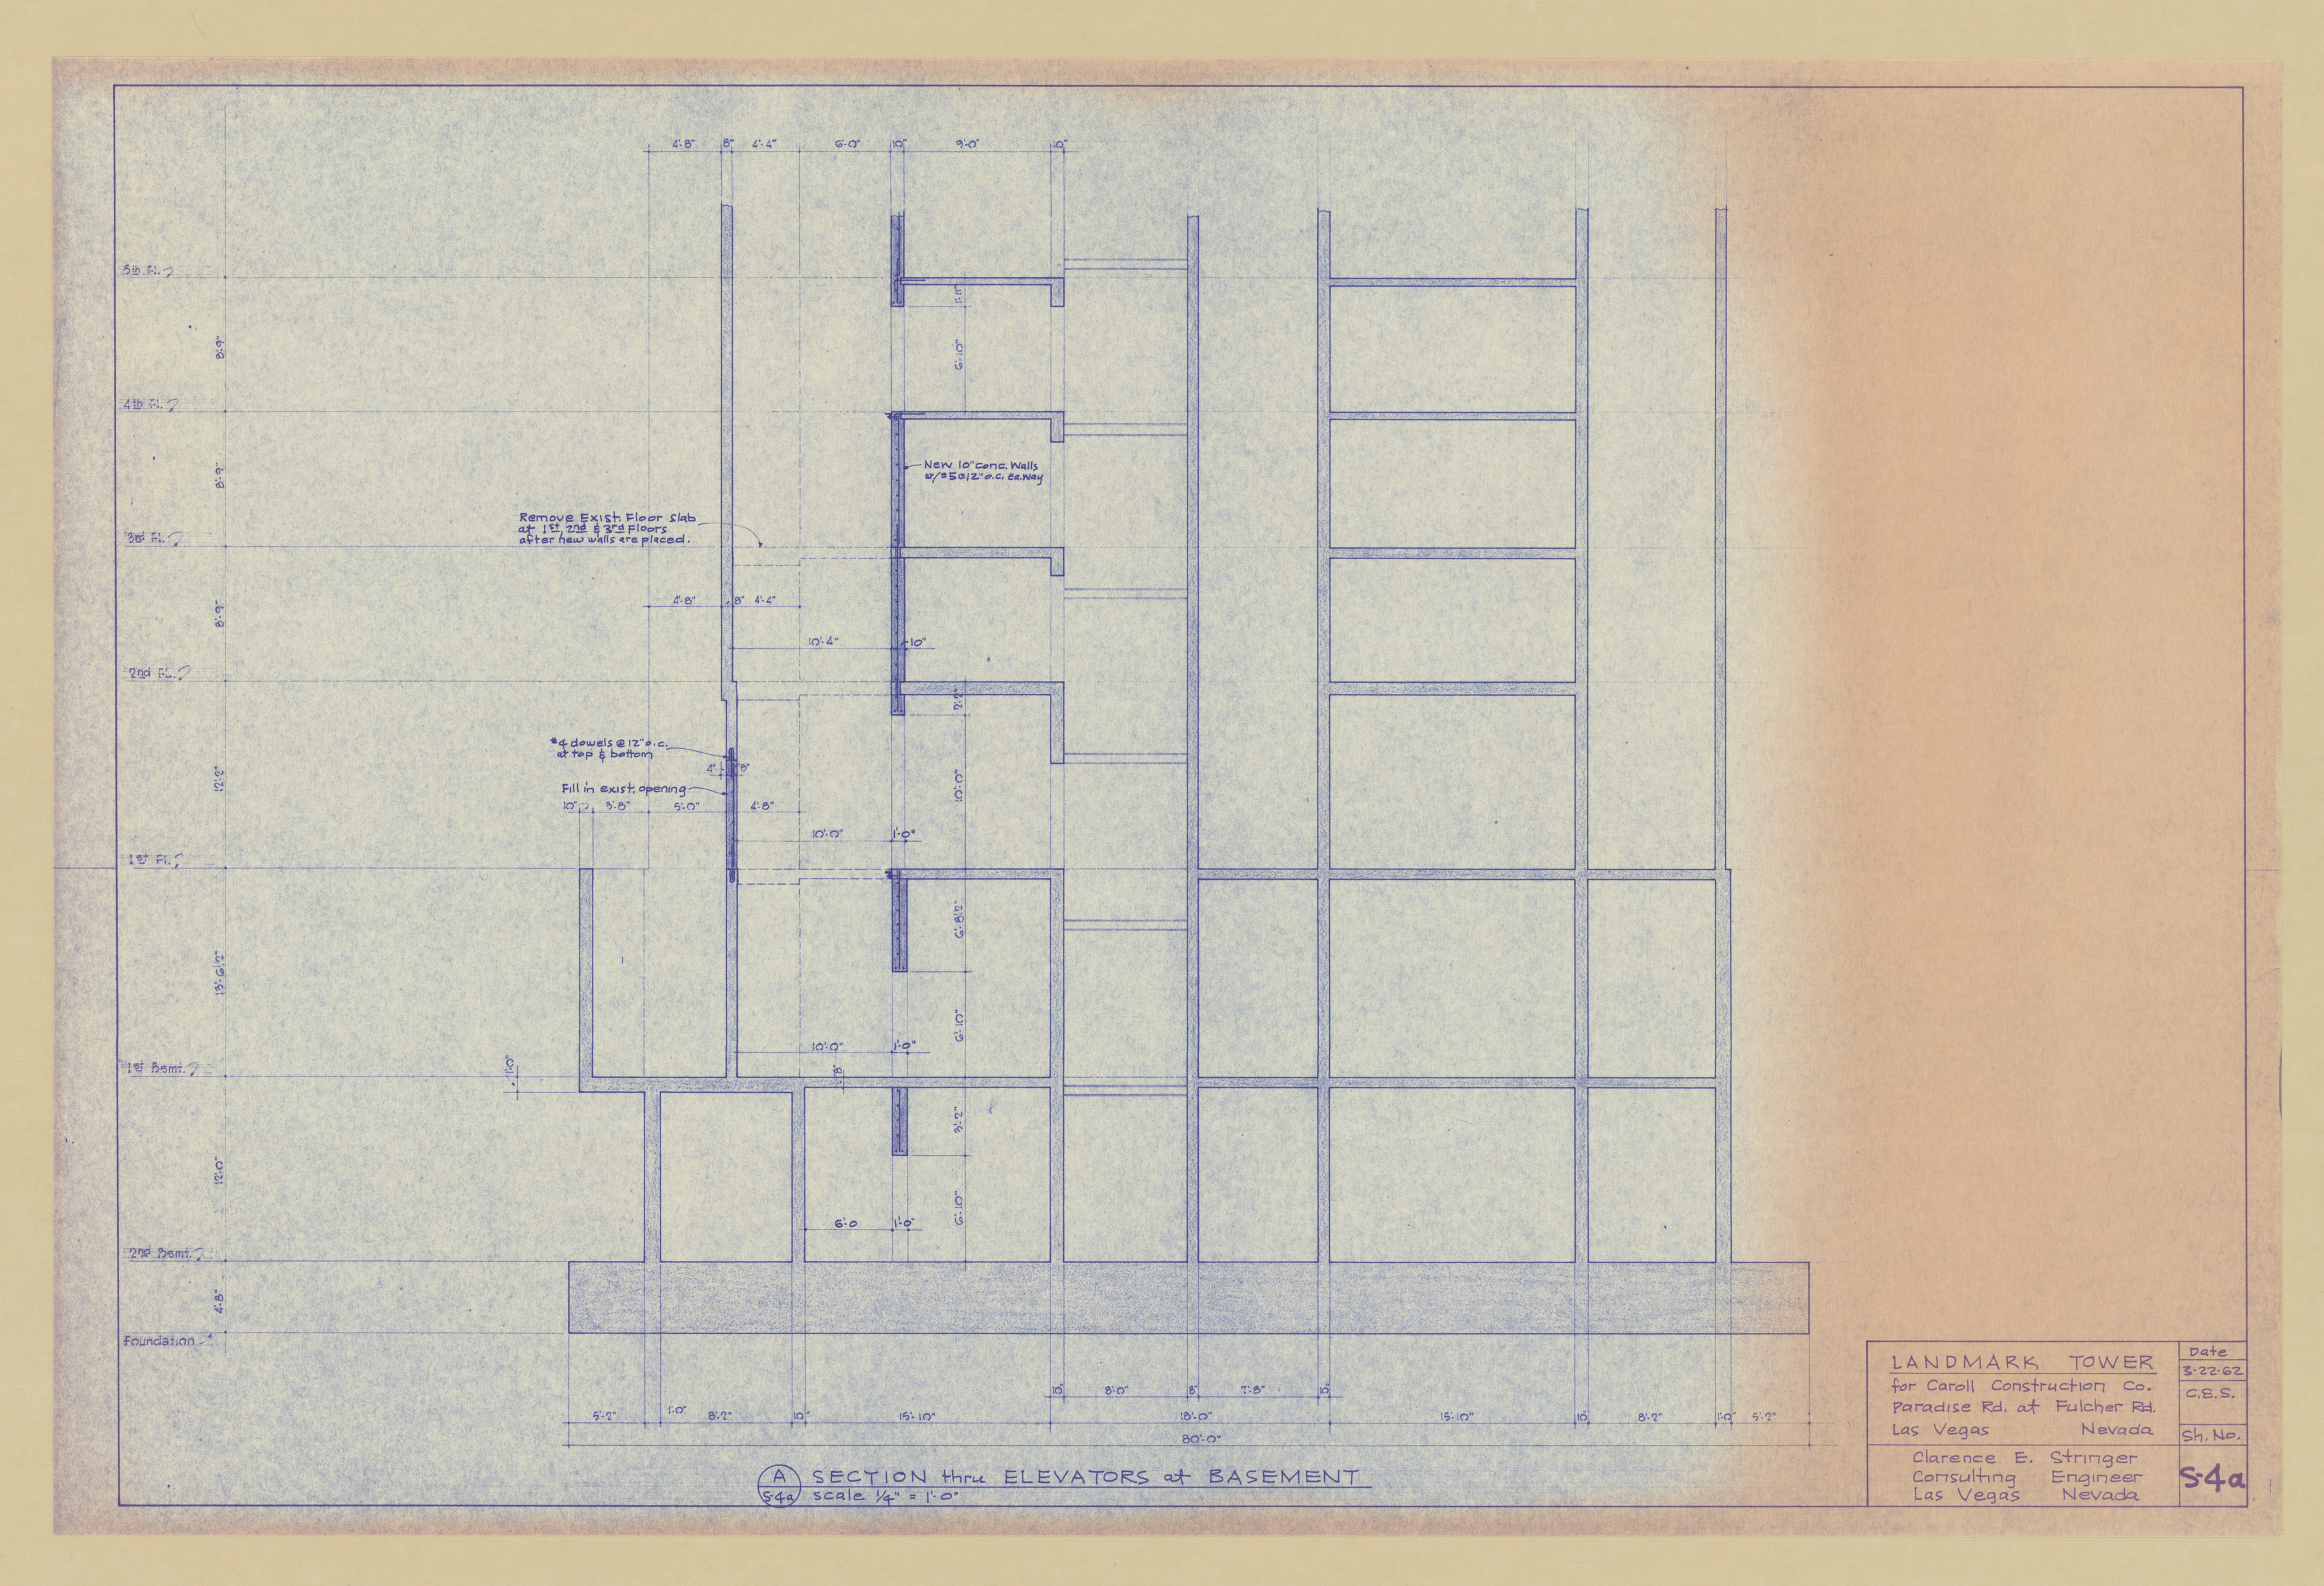 Original Landmark Tower structural drawings, sheets S1-S105: architectural drawings, image 004